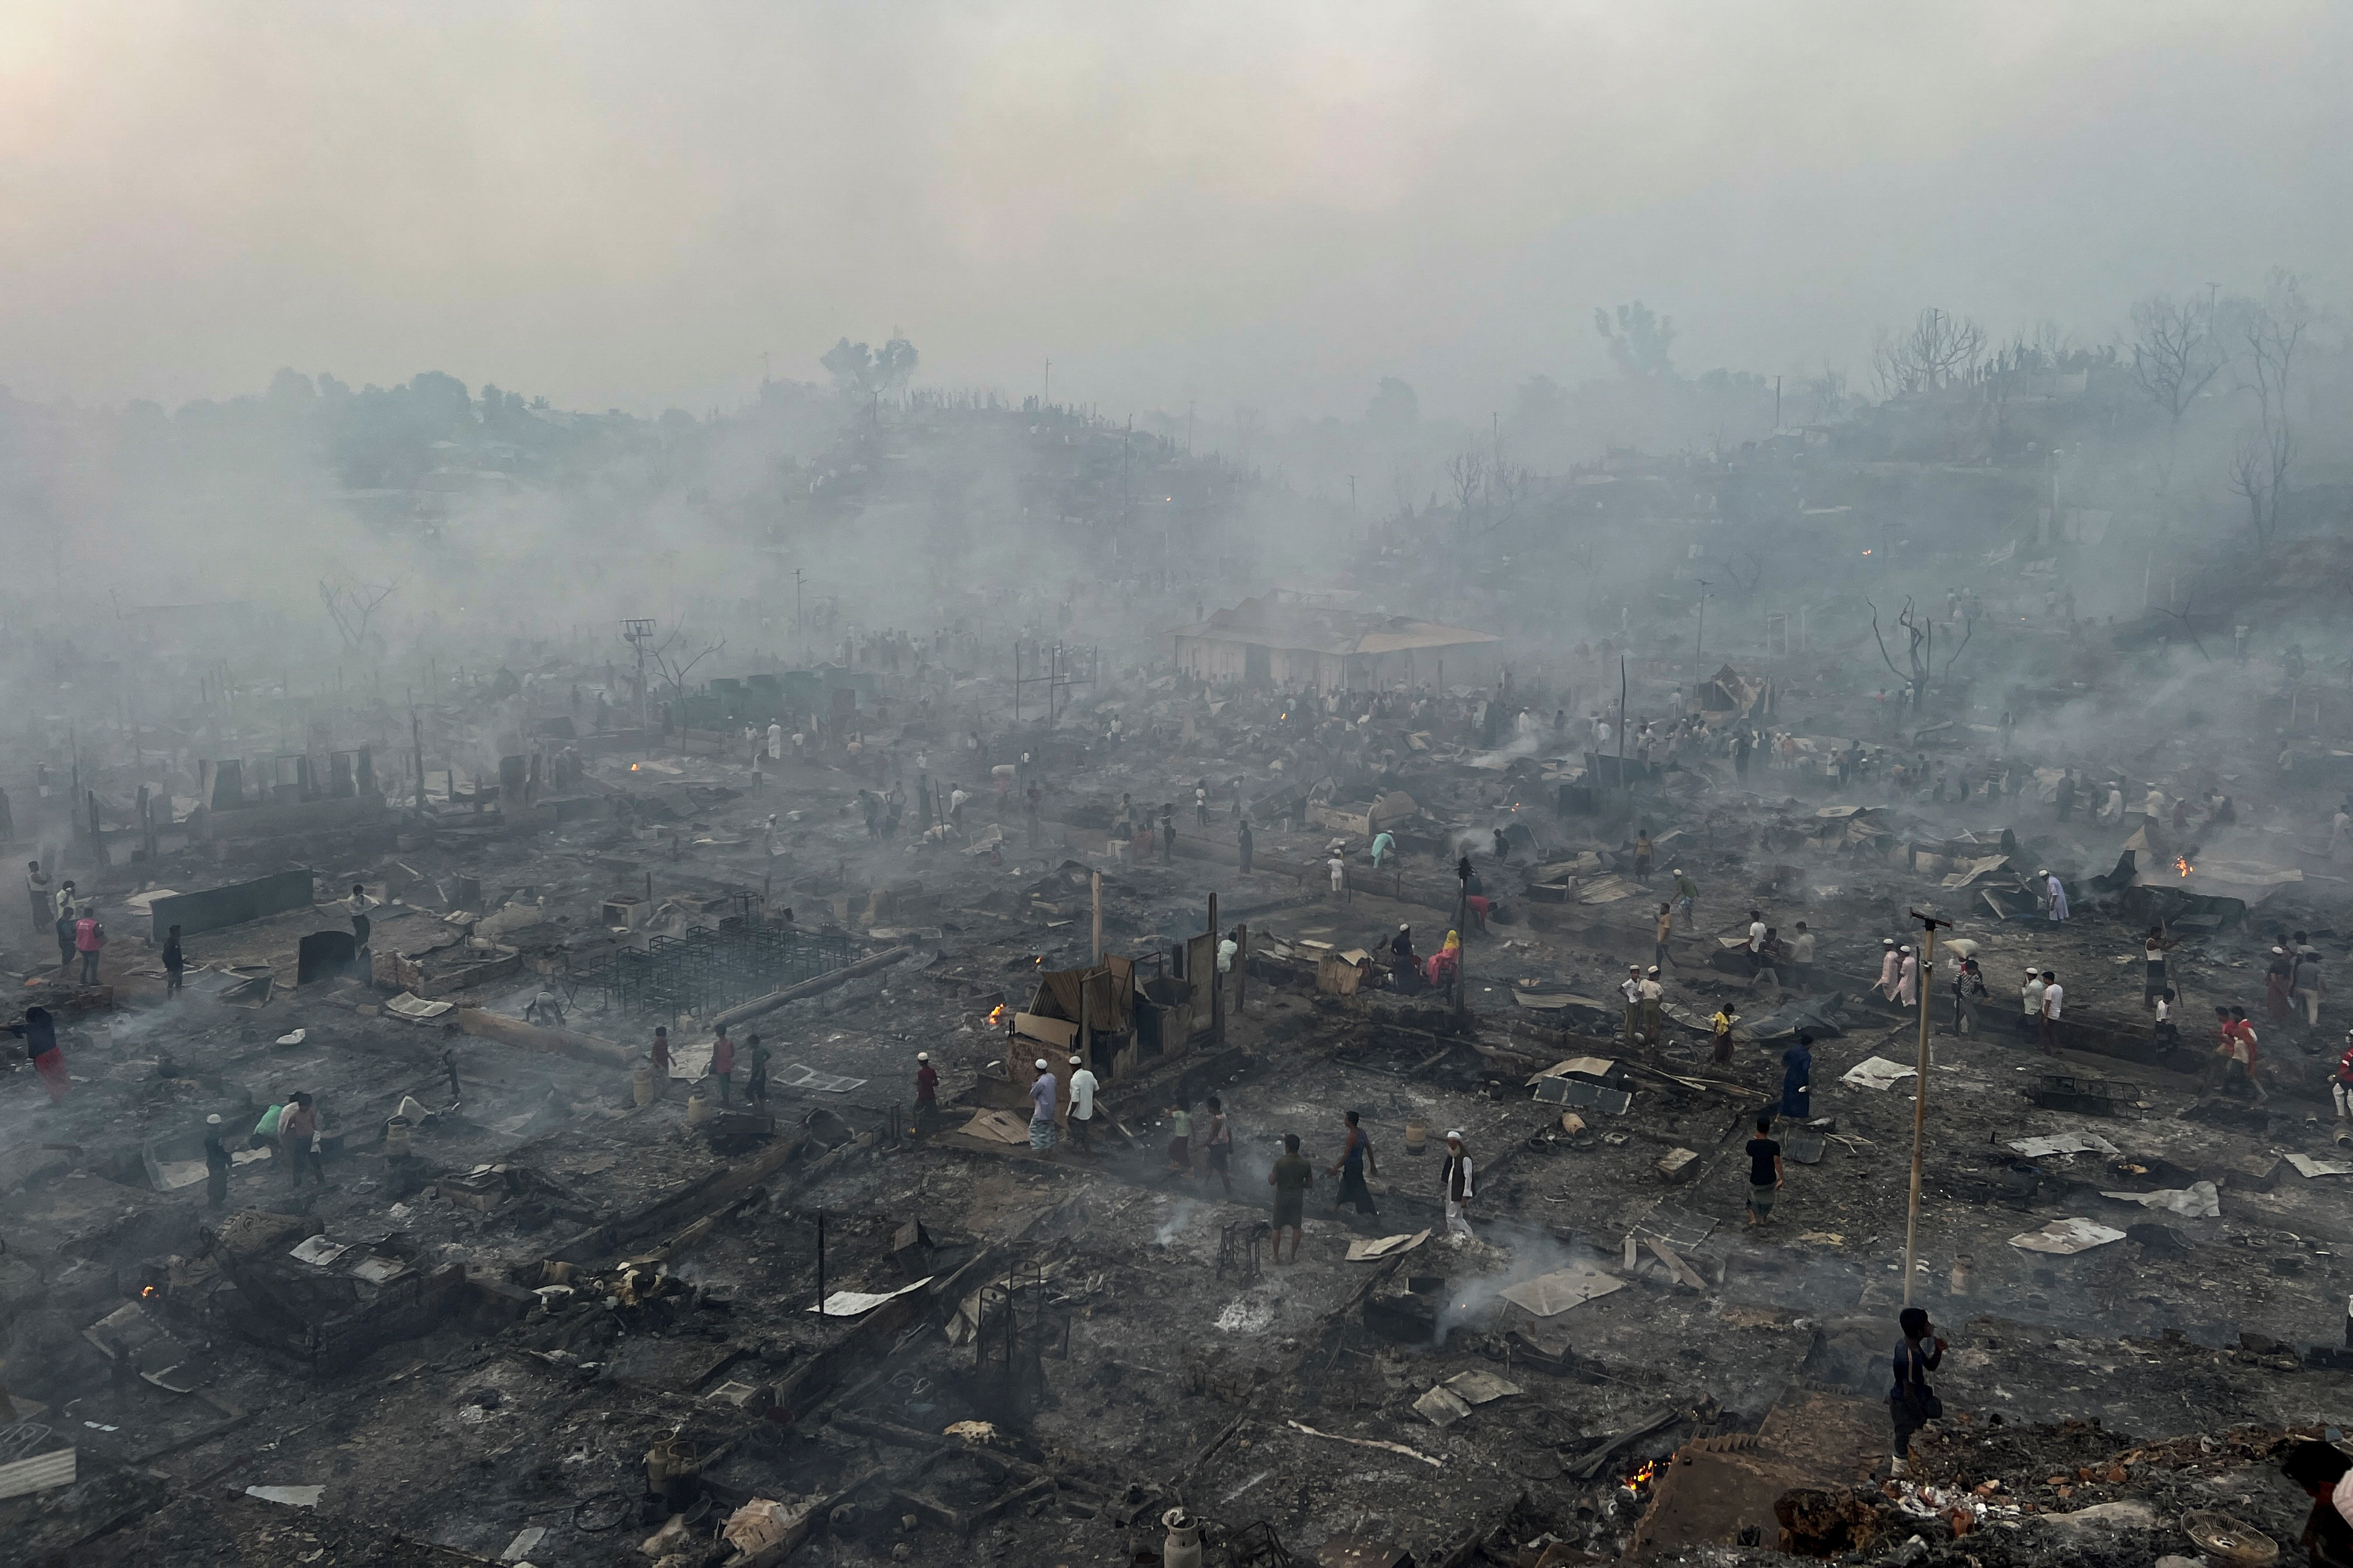 Fire destroys homes Cox Bazars refugee camp in Bangladesh Reuters picture